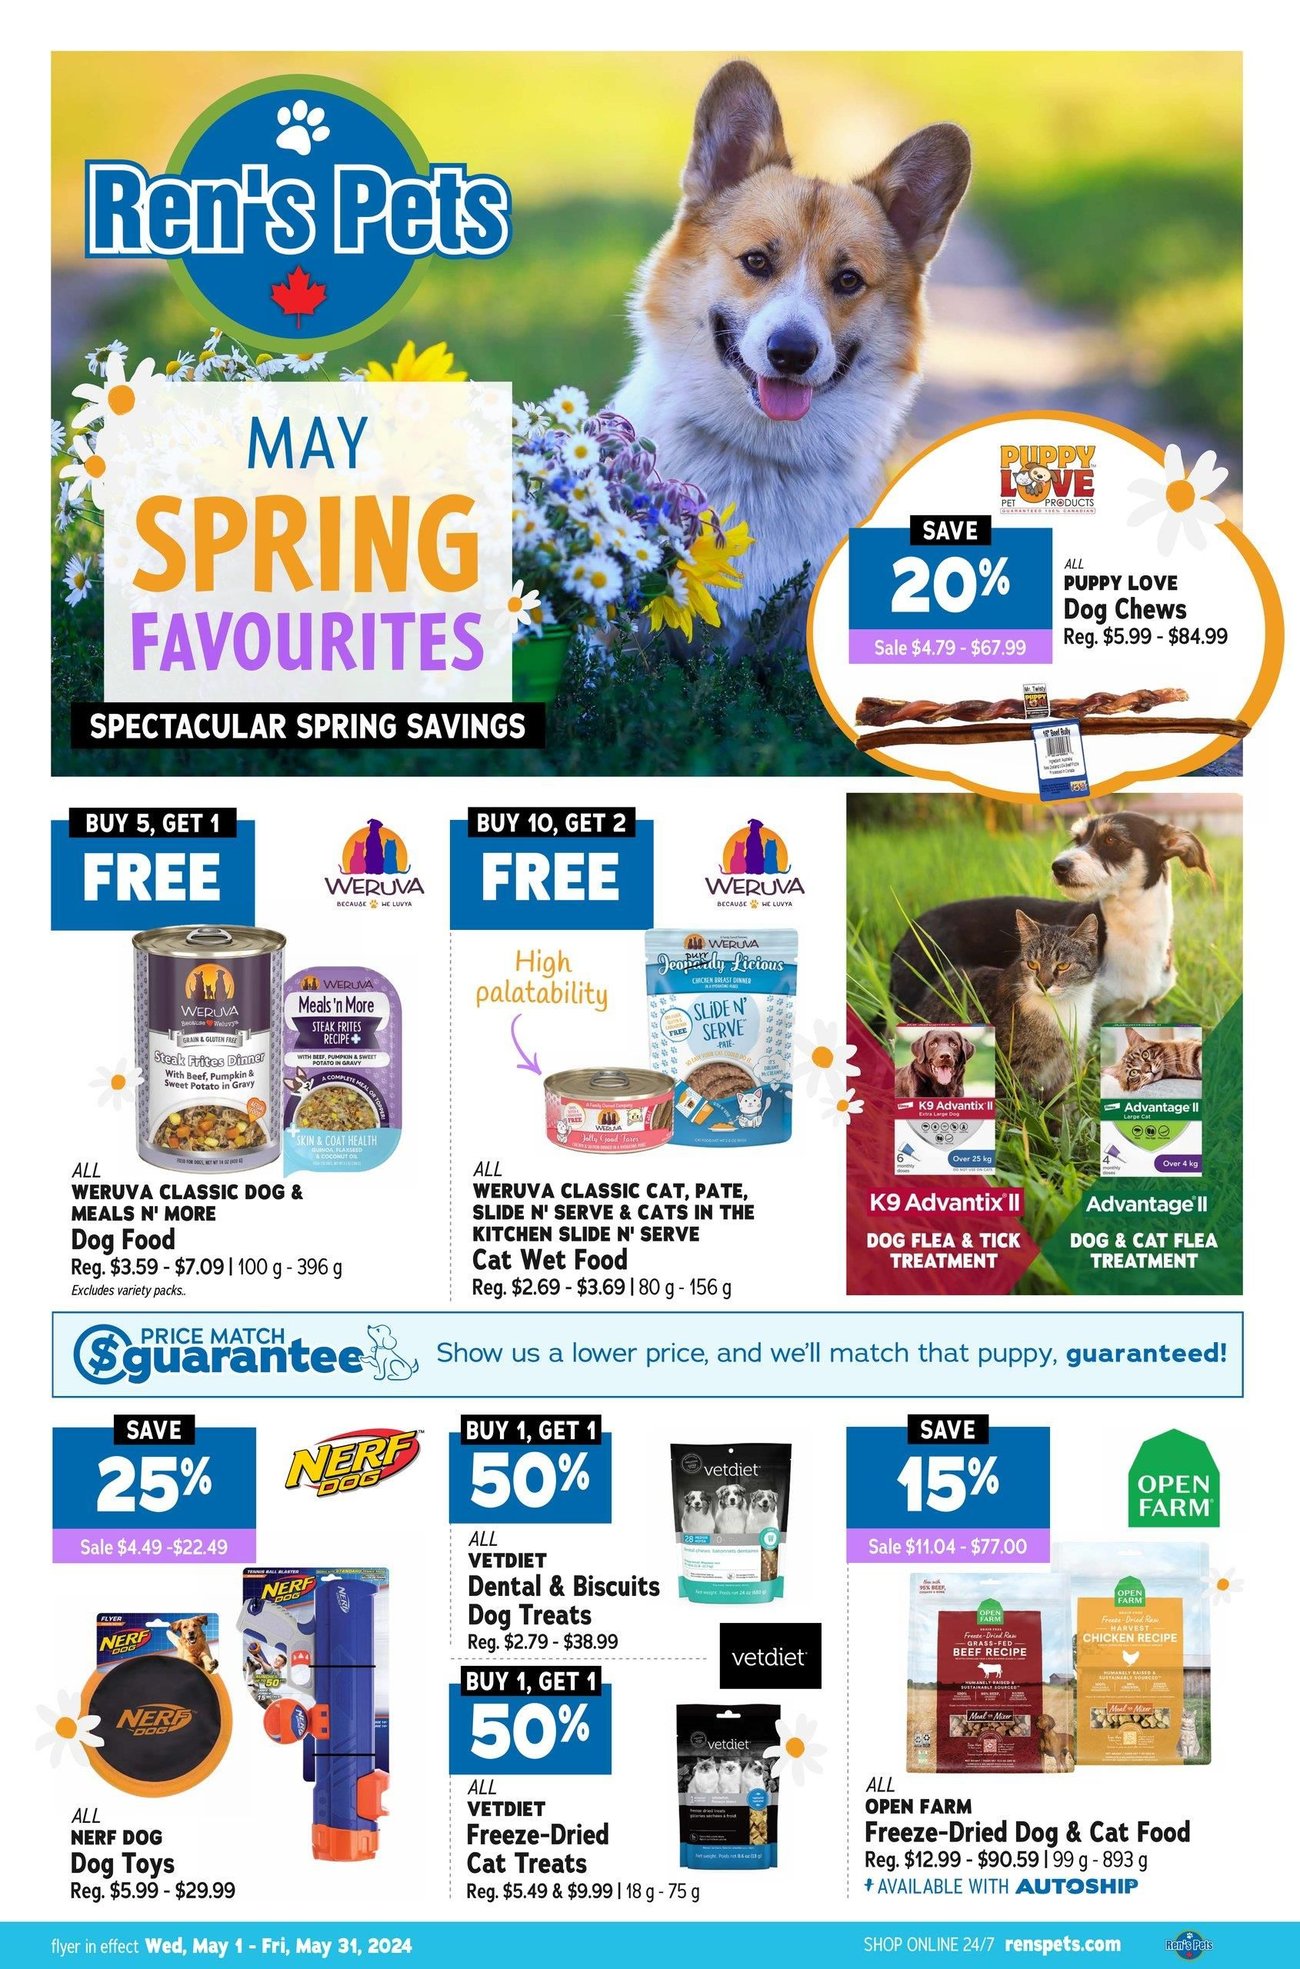 Ren's Pets - May Spring Favorites Flyer Specials - Page 1